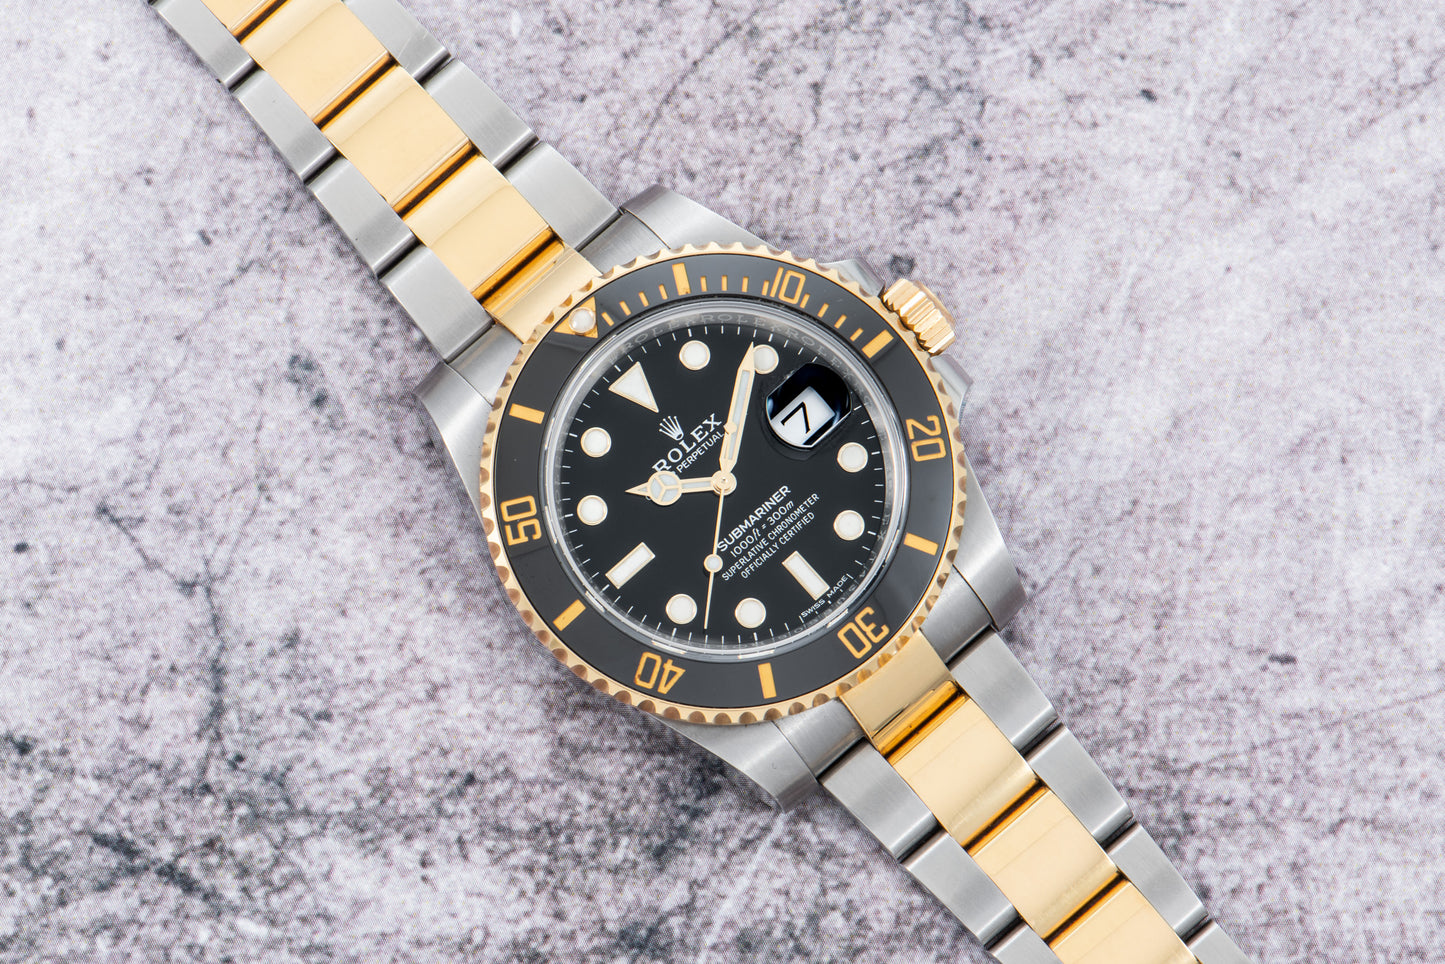 Rolex Submariner Date reference 116613LN